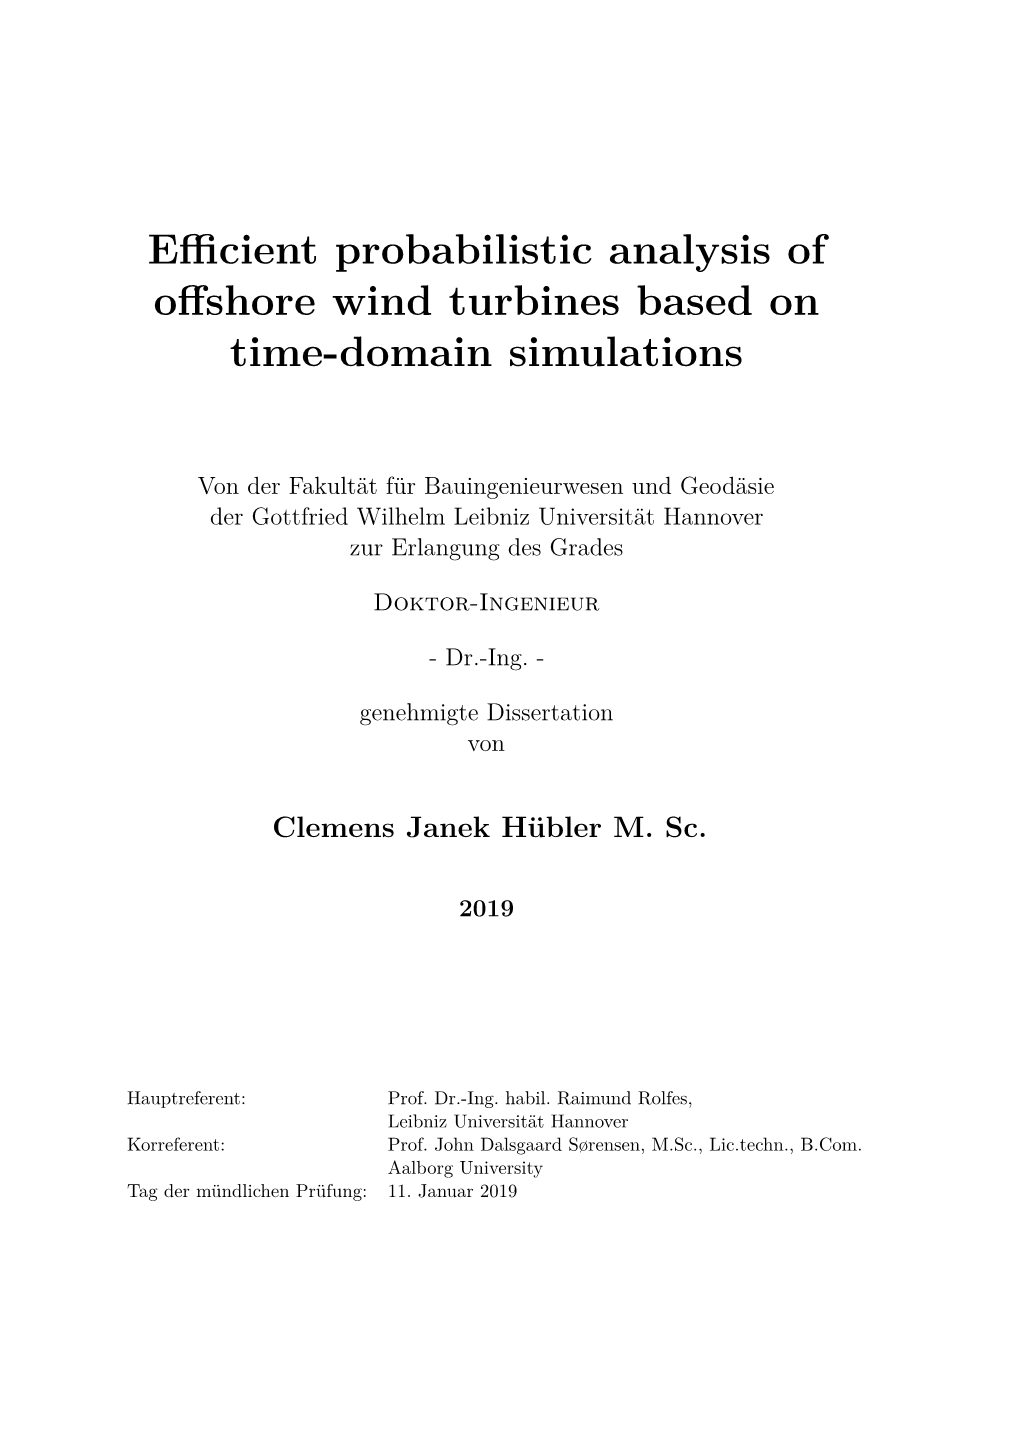 Efficient Probabilistic Analysis of Offshore Wind Turbines Based On